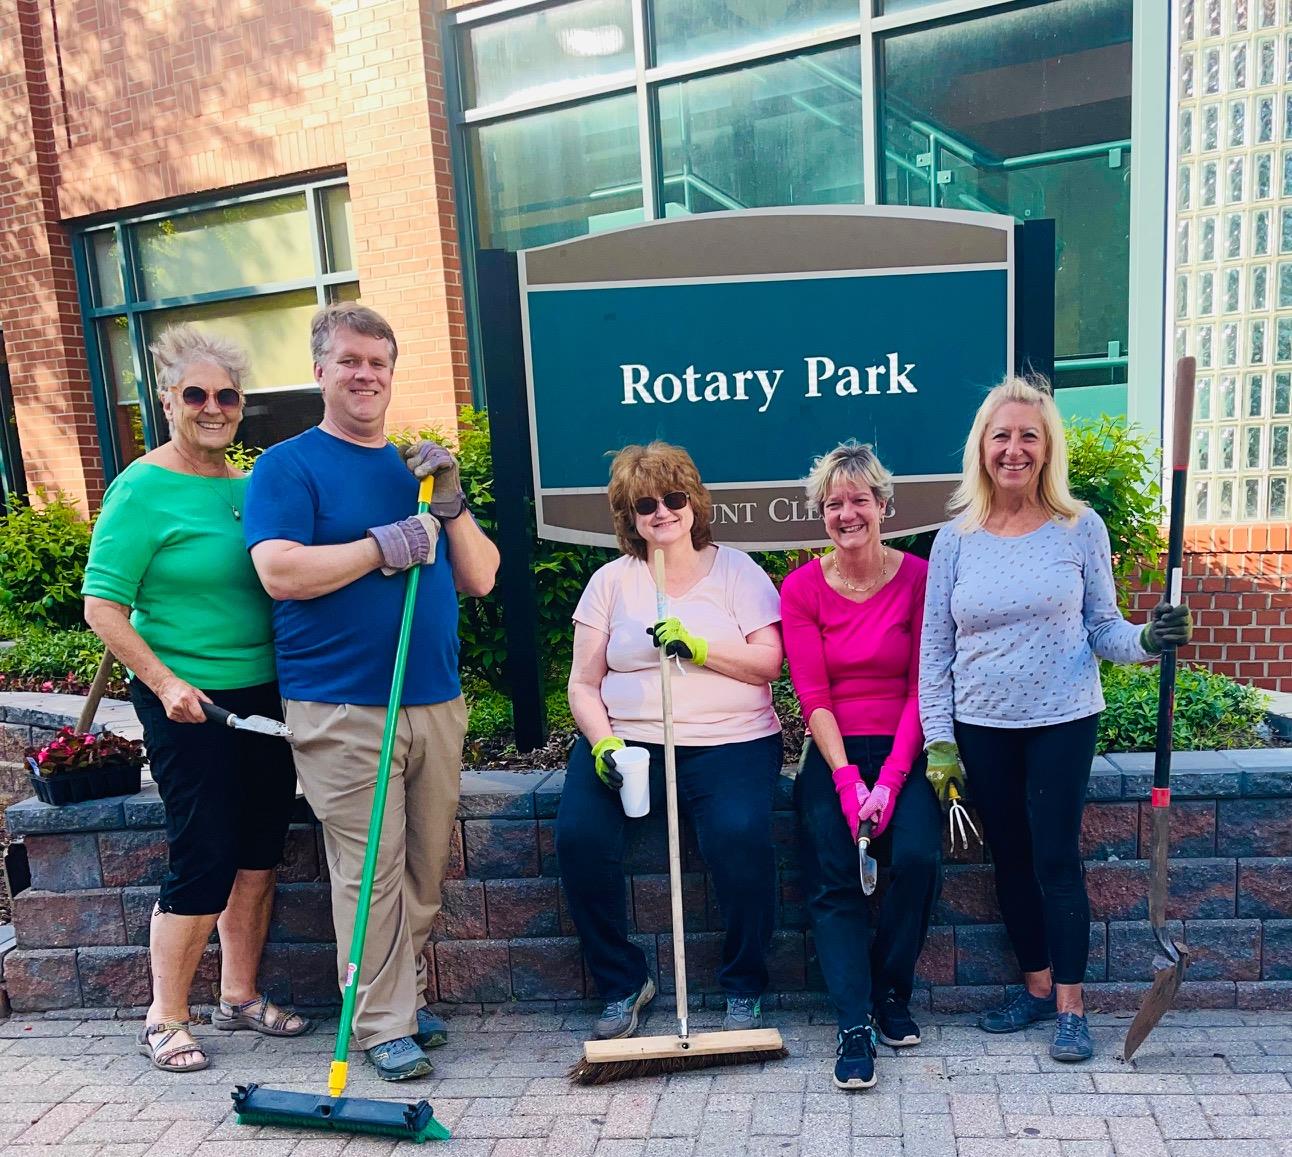 Cleaning up Rotary Park